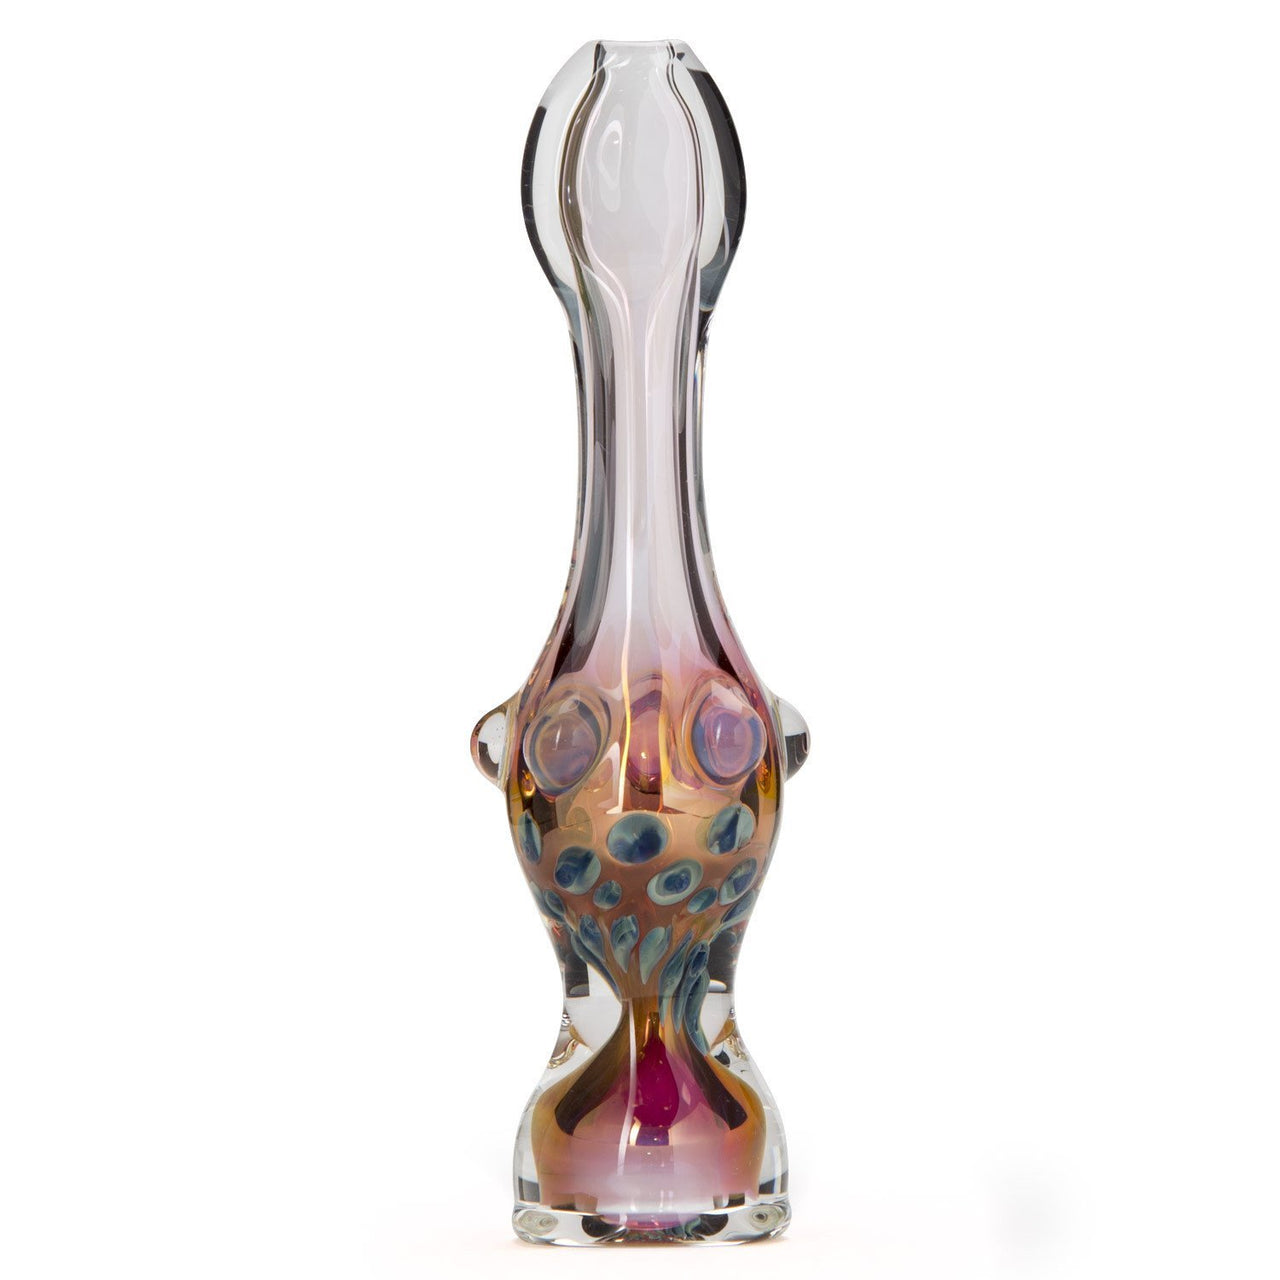 Home Blown Glass Inside Out One Hitter - Large - 420 Science - The most trusted online smoke shop.